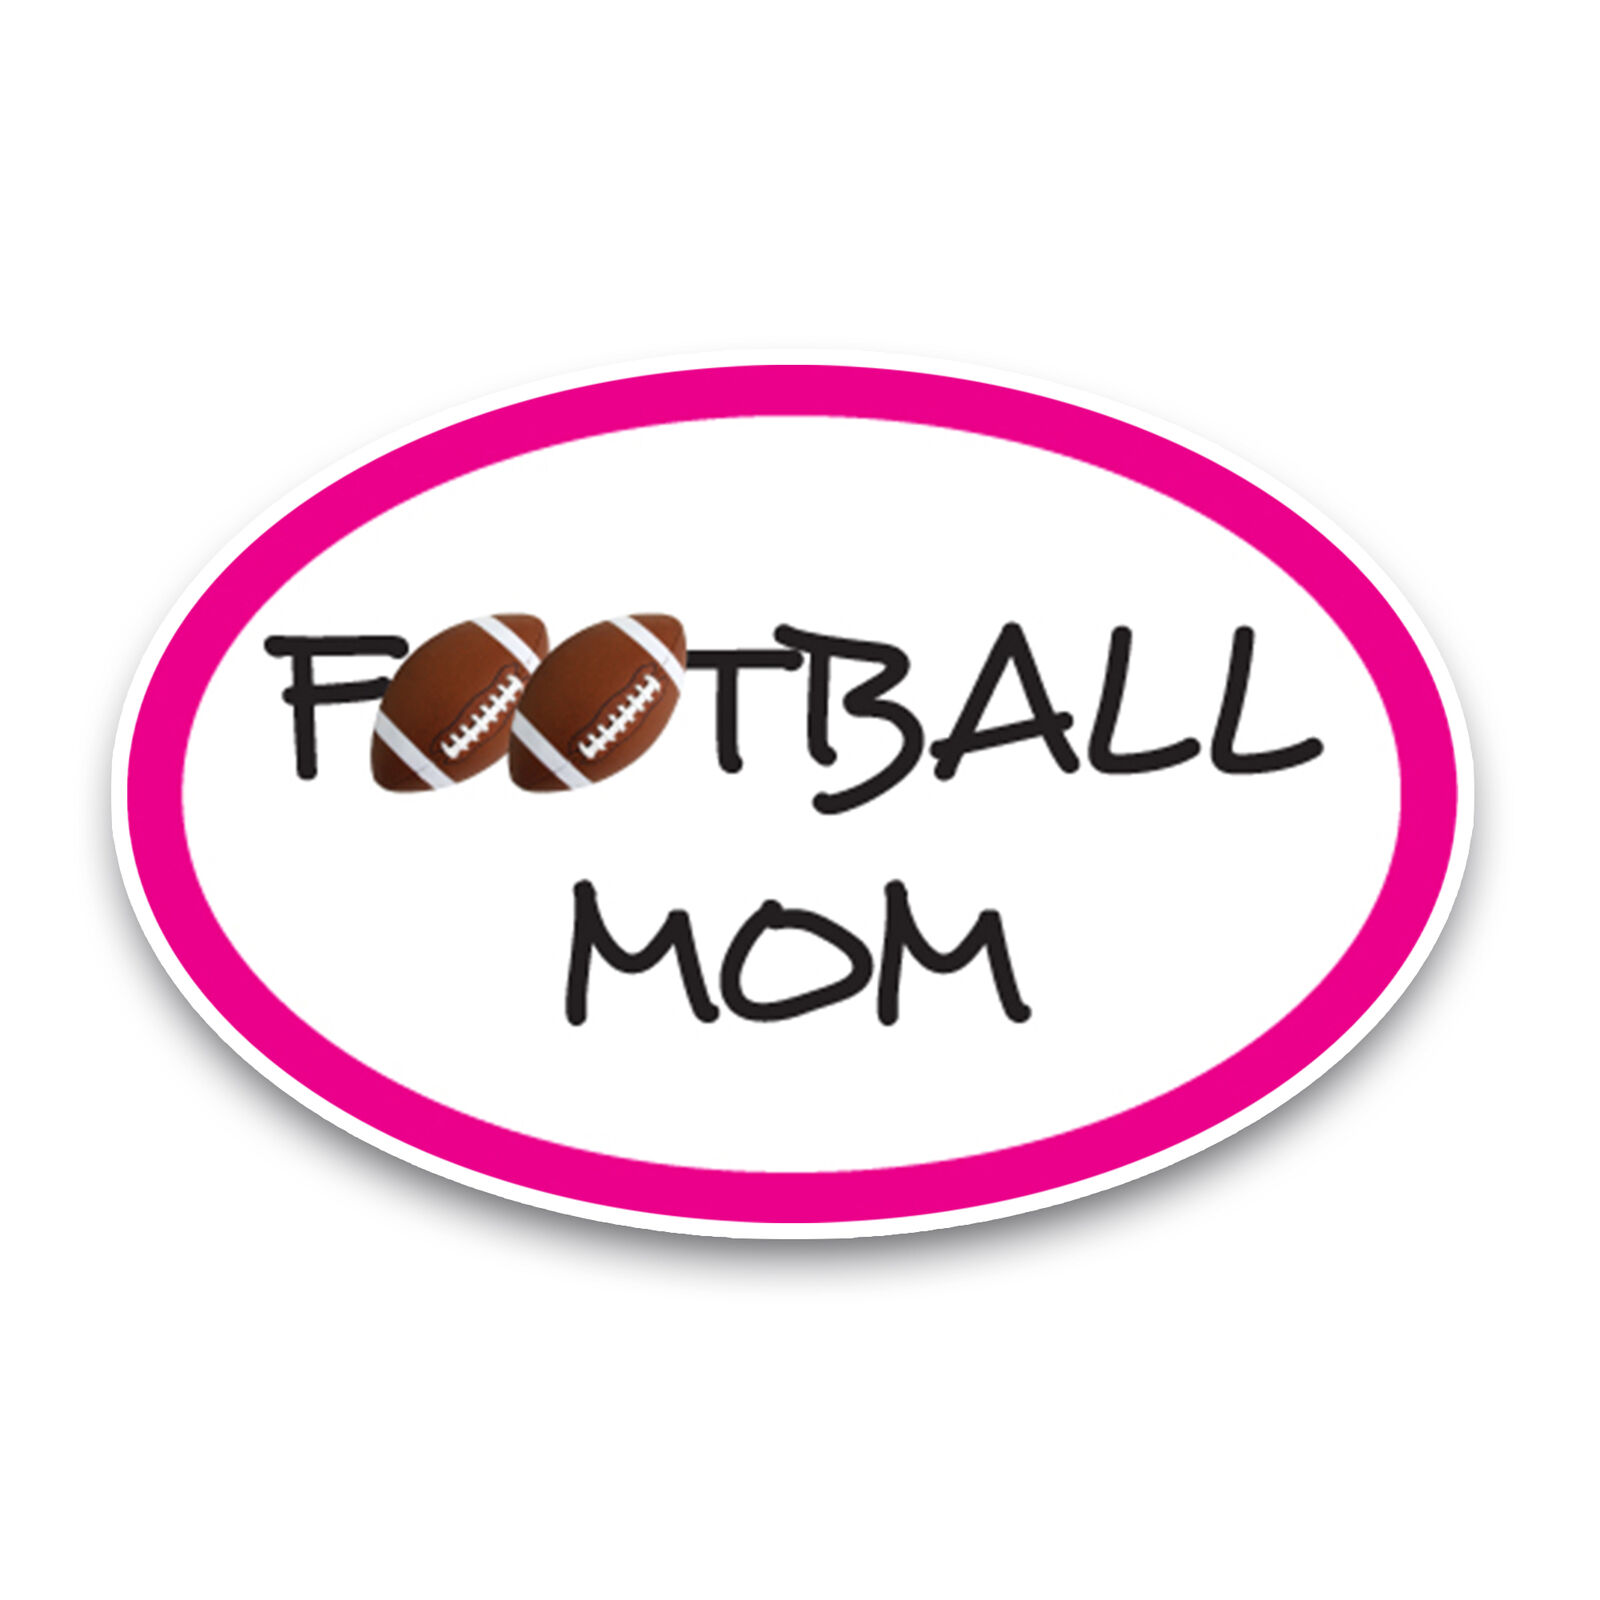 Football Mom Sports Pink Oval Magnet Decal, 4x6 Inches, Automotive Magnet